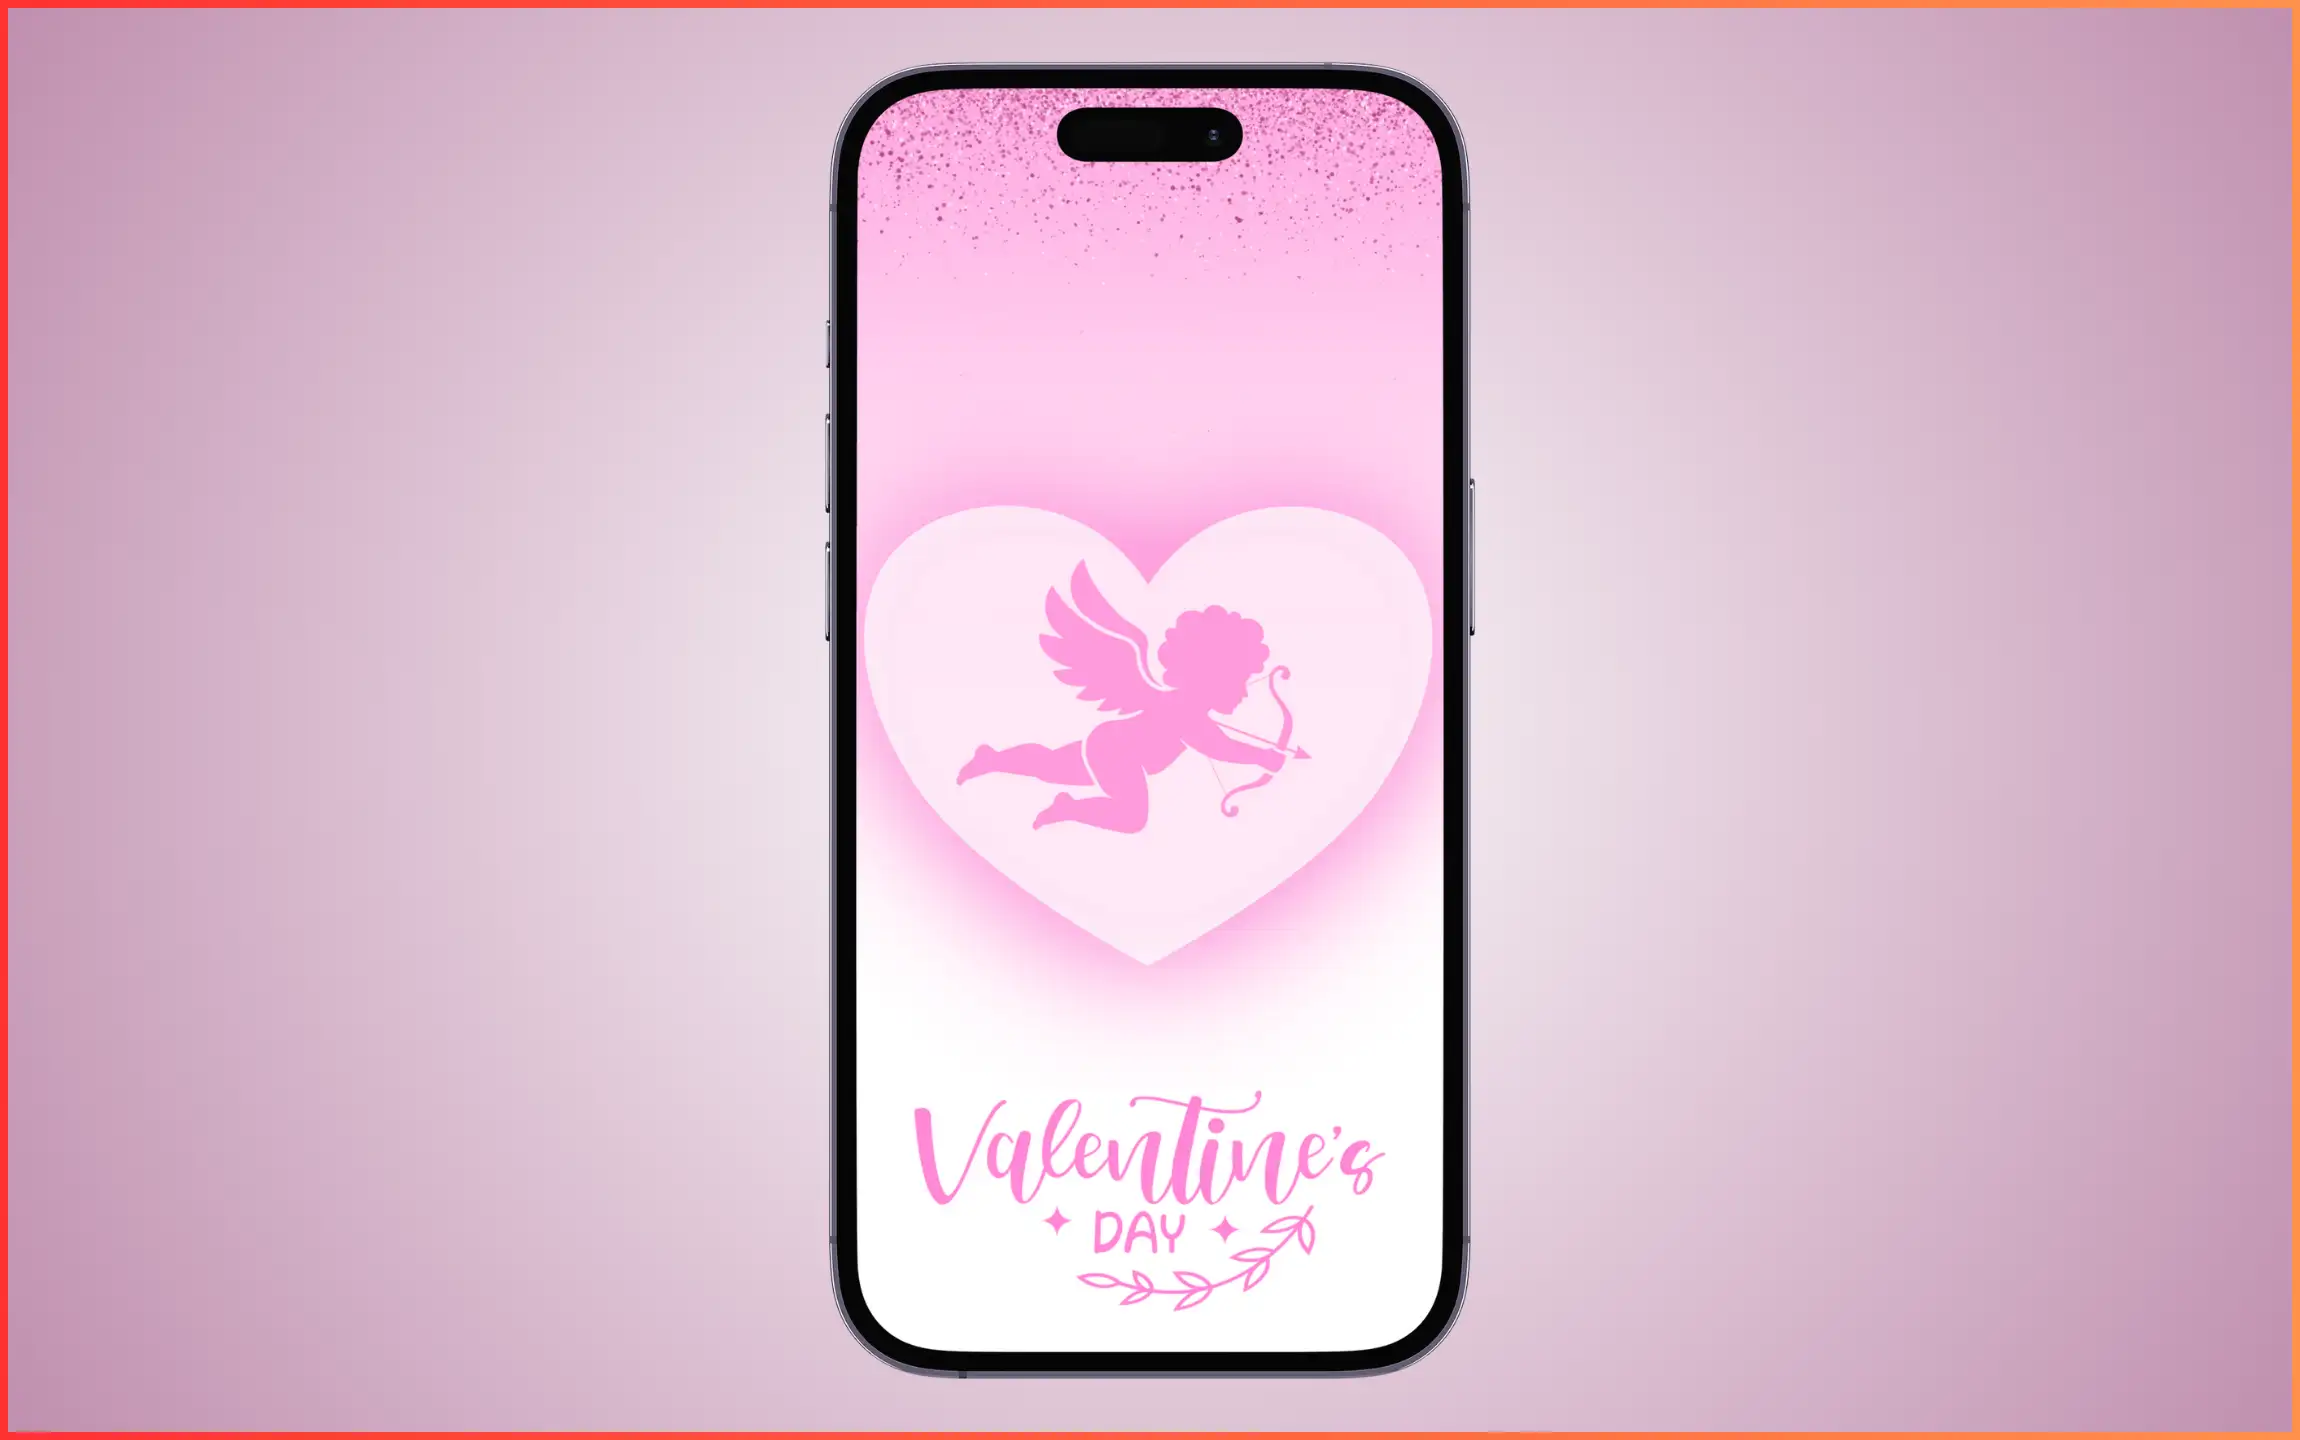 Cupid valentines Day wallpaper for iPhone